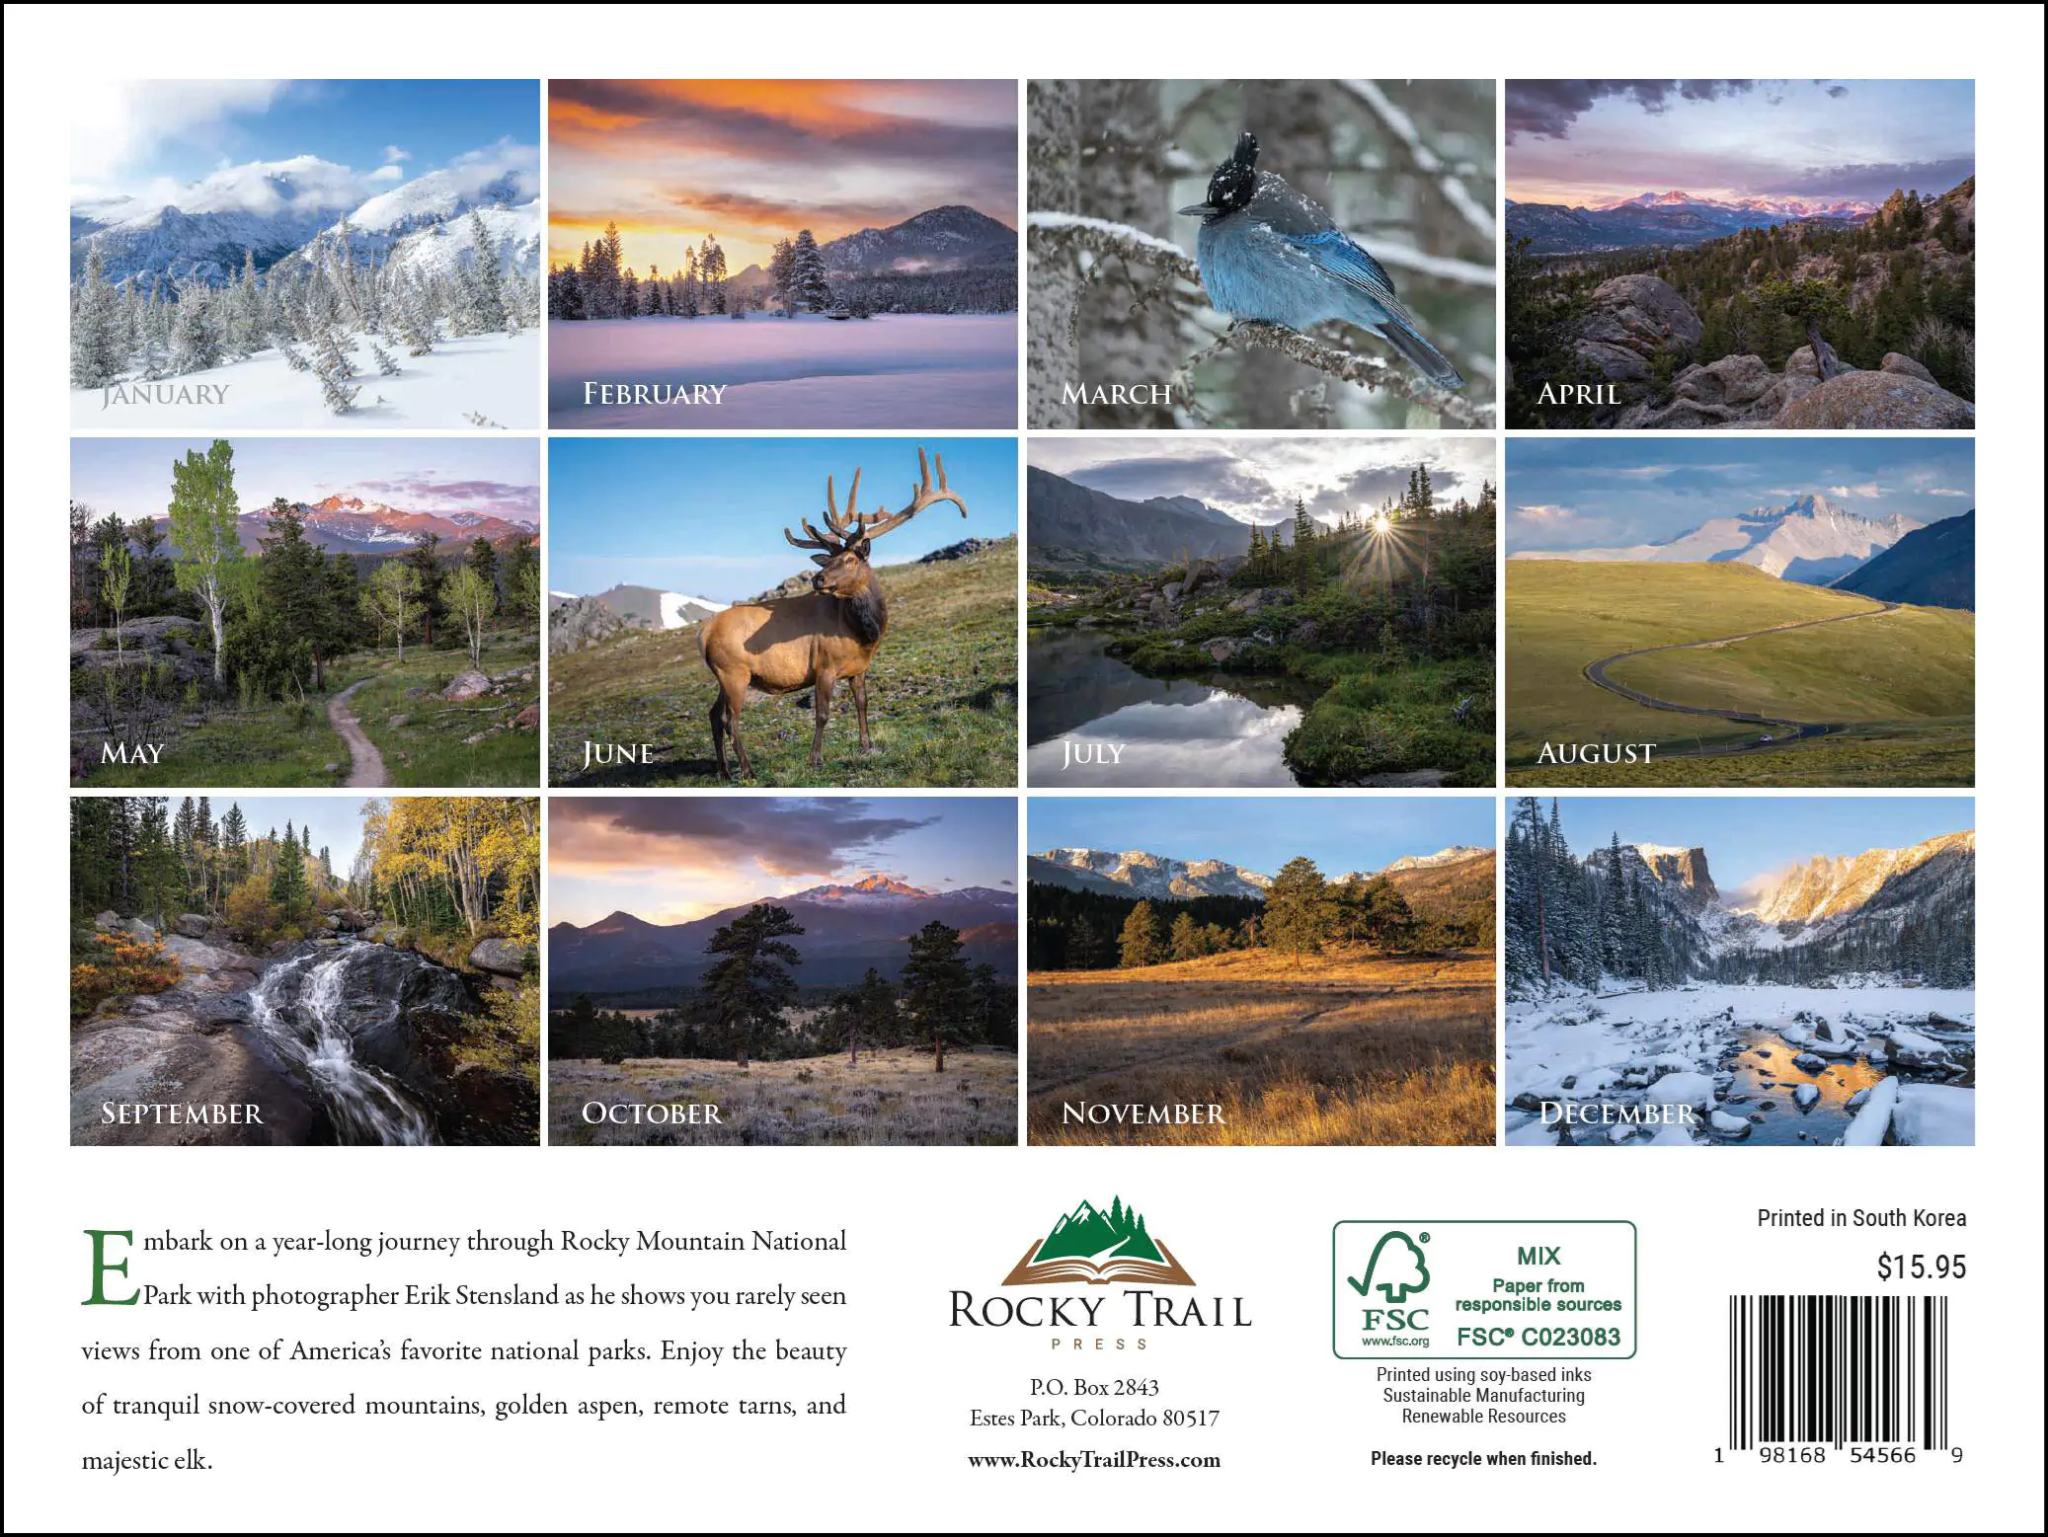 A 2025 Erik Stensland Scenic RMNP Calendar featuring Rocky Mountain scenery and wildlife. Each month has a different photograph depicting various seasons and landscapes within Rocky Mountain National Park. Price: $15.95.